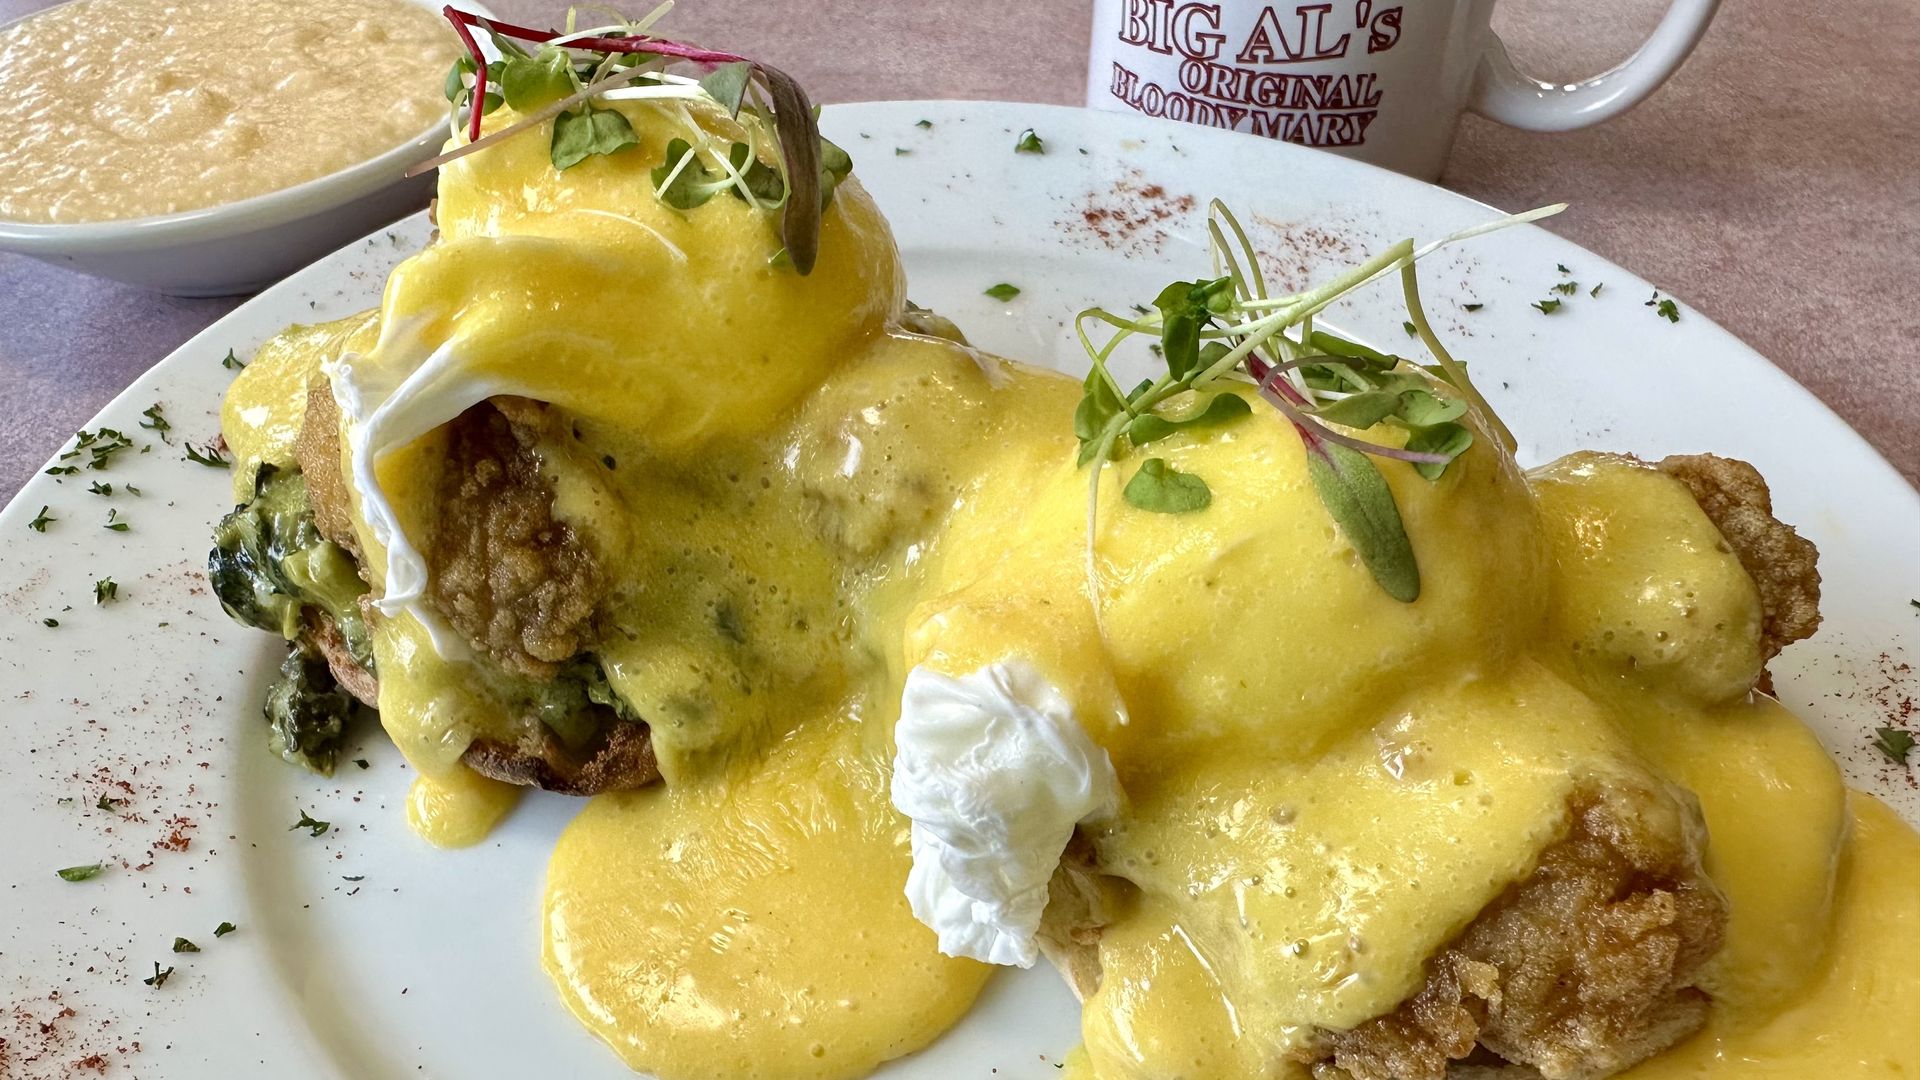 Photo shows a plate of eggs Benedict, cheese grits and coffee